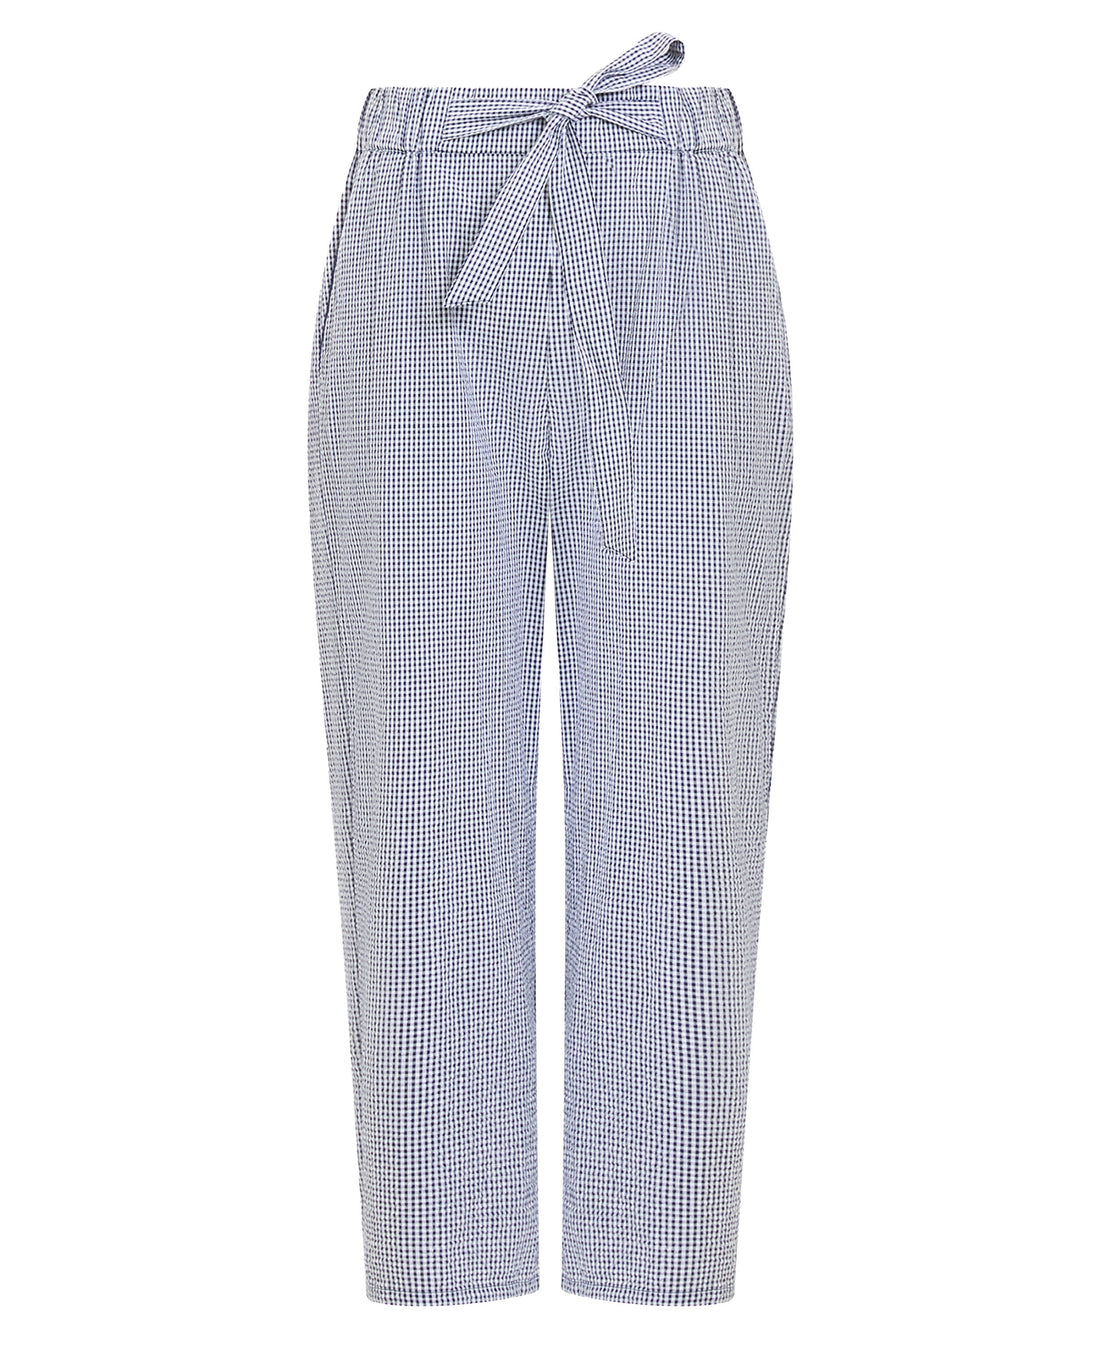 Salerno Gingham Trousers - Summer Navy White